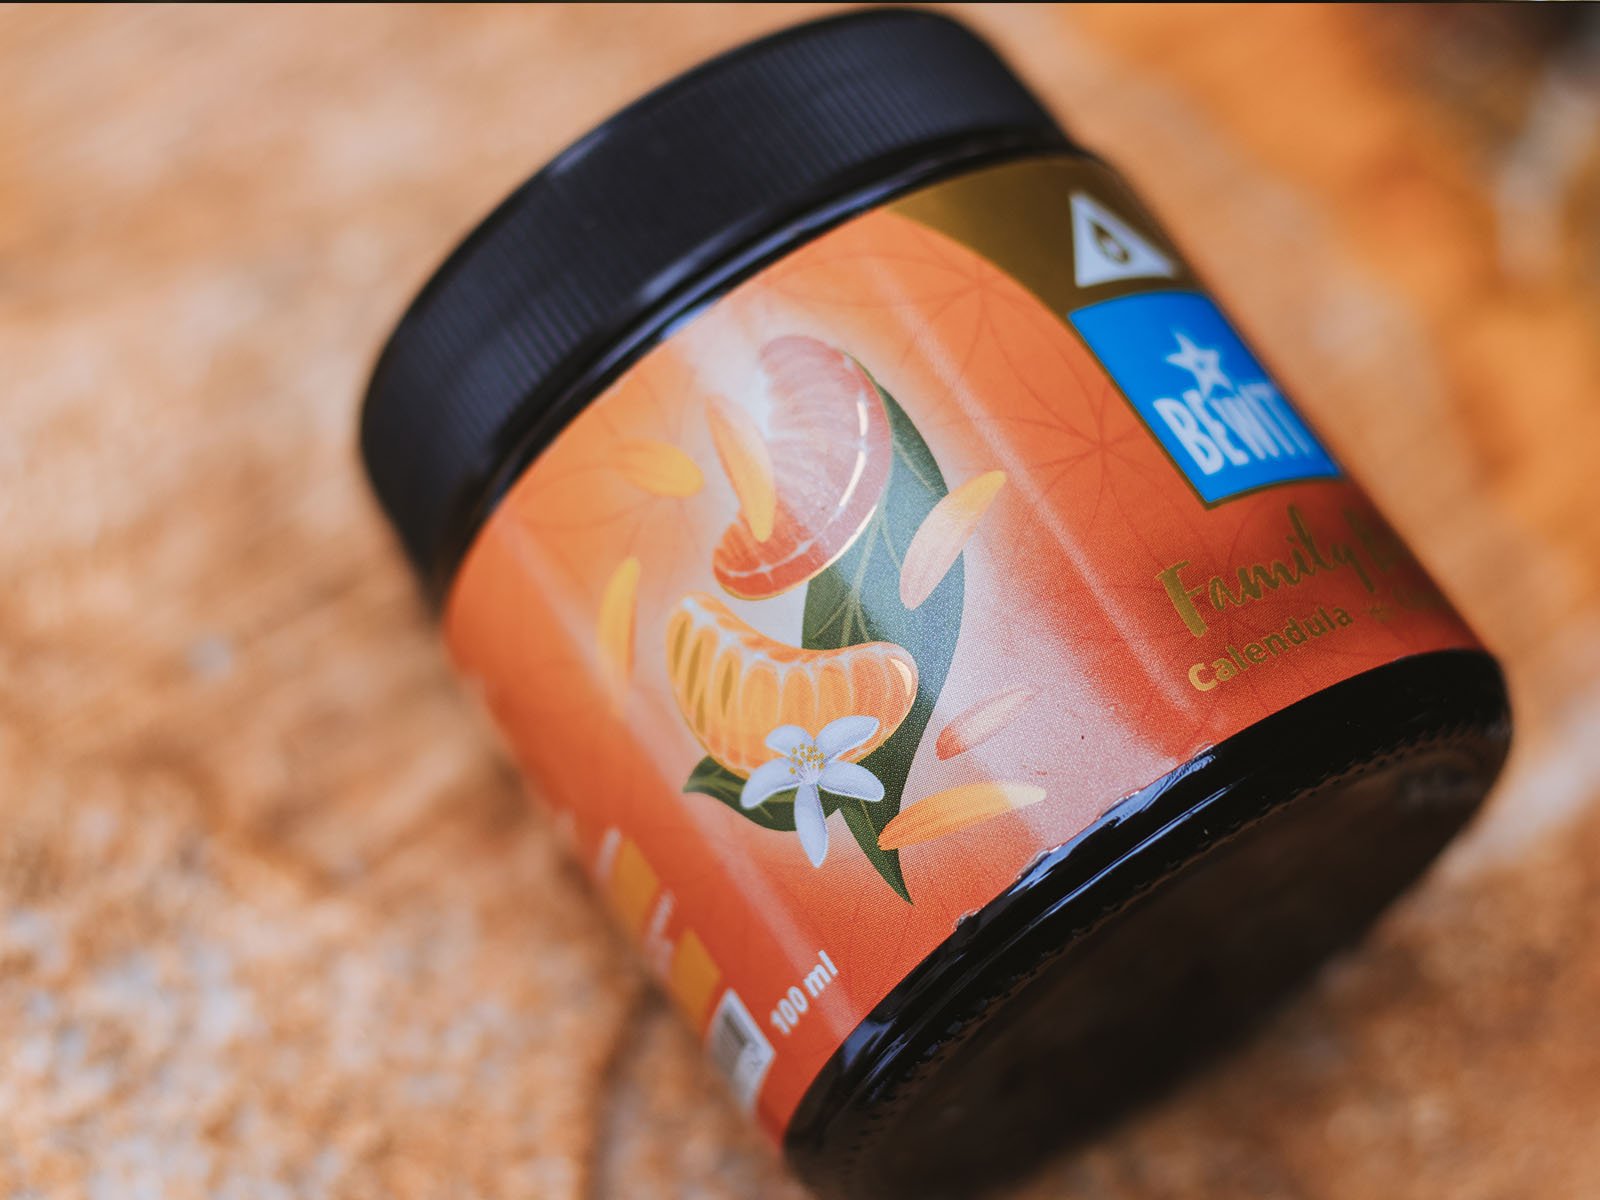 FAMILY BALM CALENDULA AND CLEMENTINE - CARING BALM FOR THE WHOLE FAMILY - 11